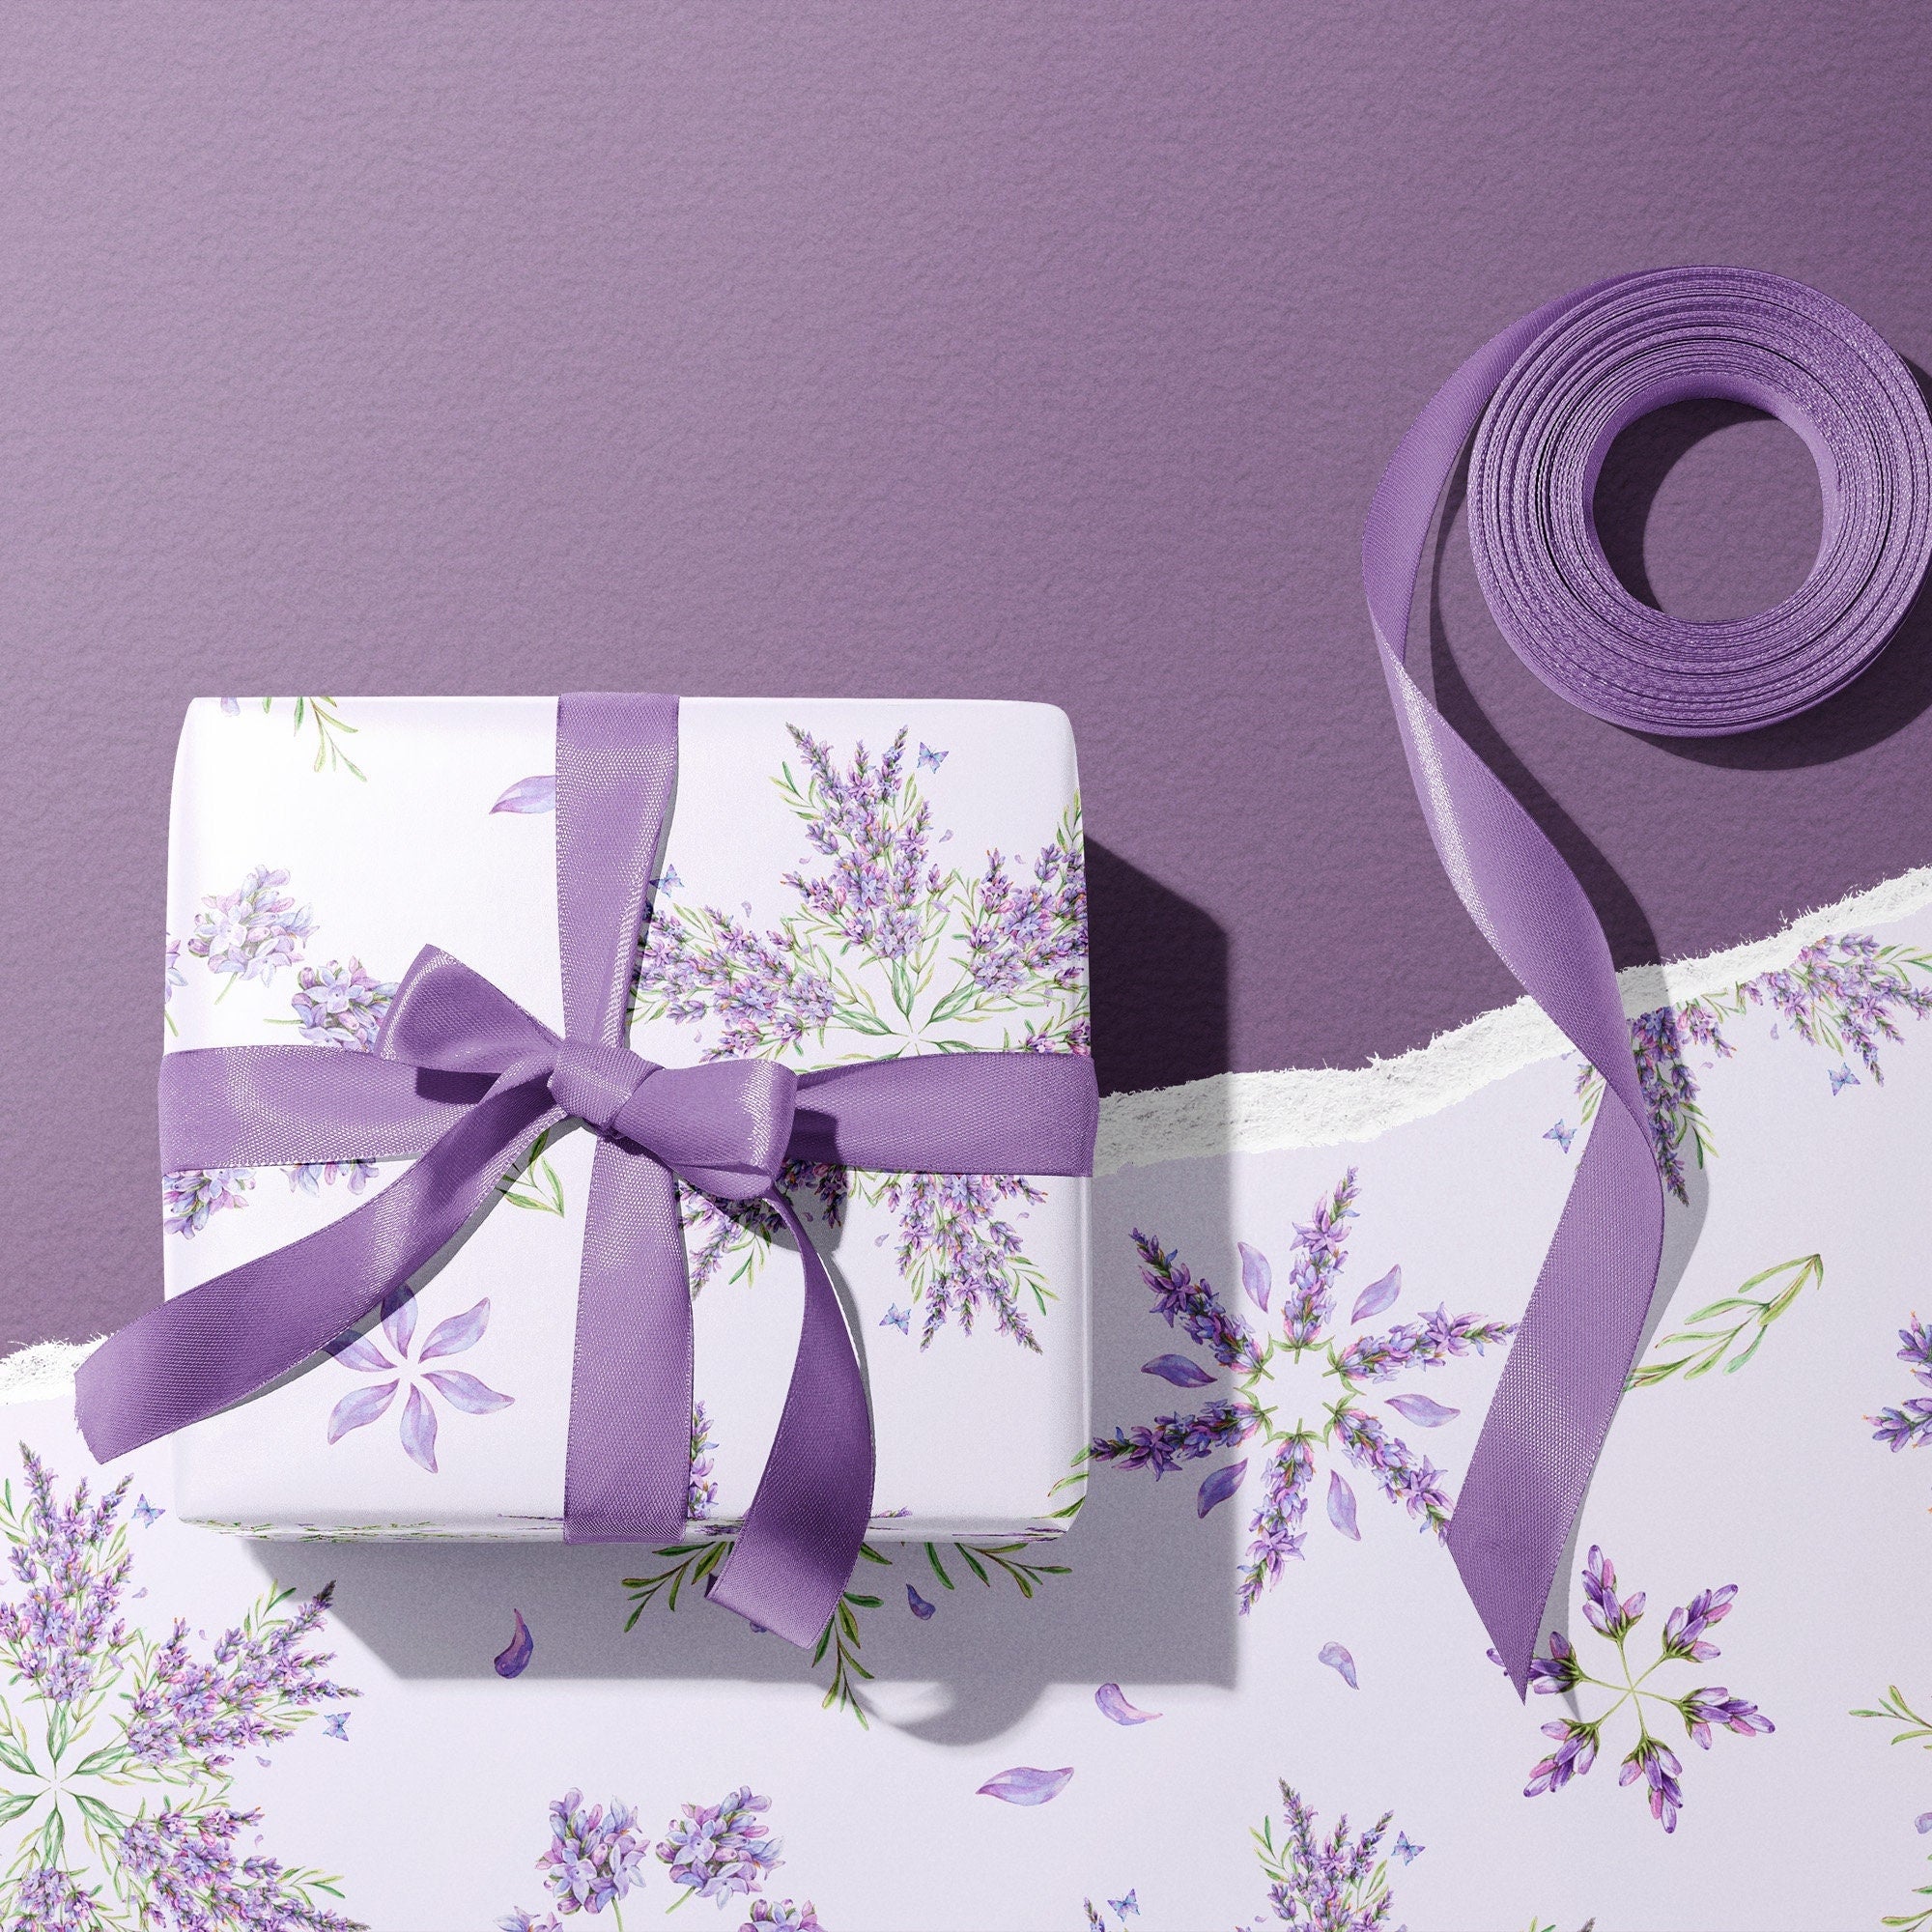 High-quality branded wrapping paper | Pixartprinting